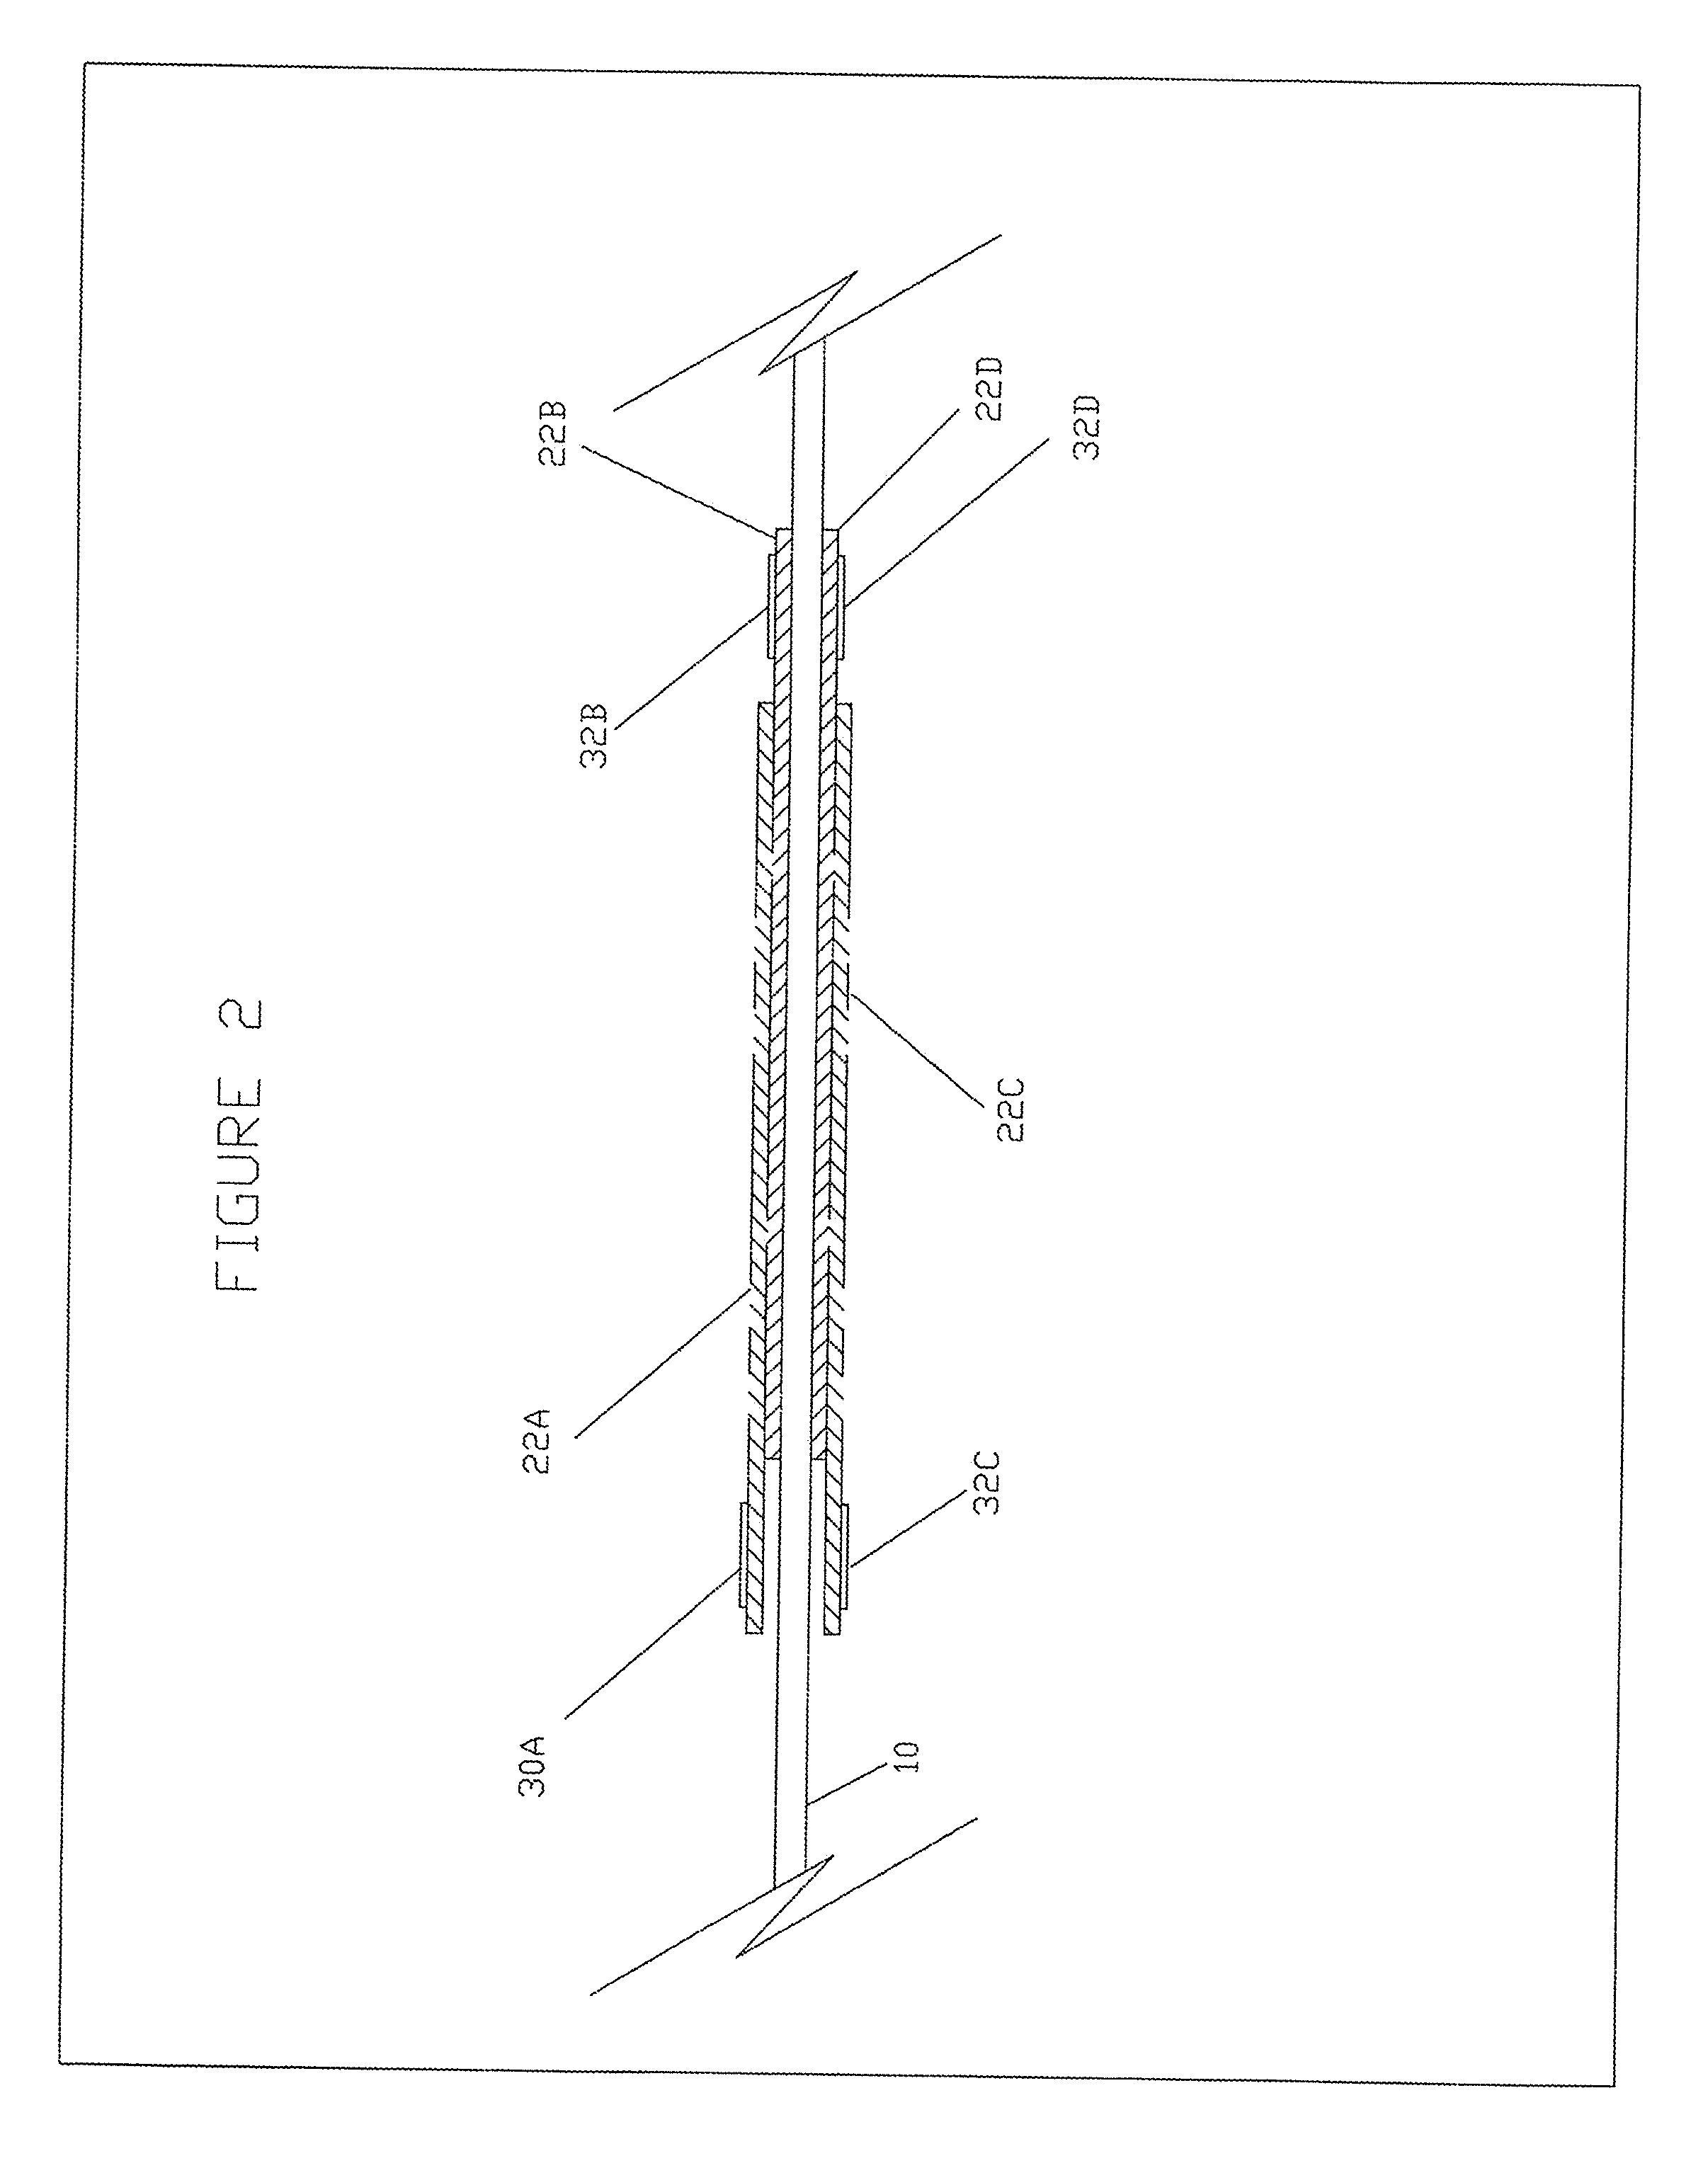 Surgical device for the removal of tissue employing a vibrating beam with cold plasma sterilization